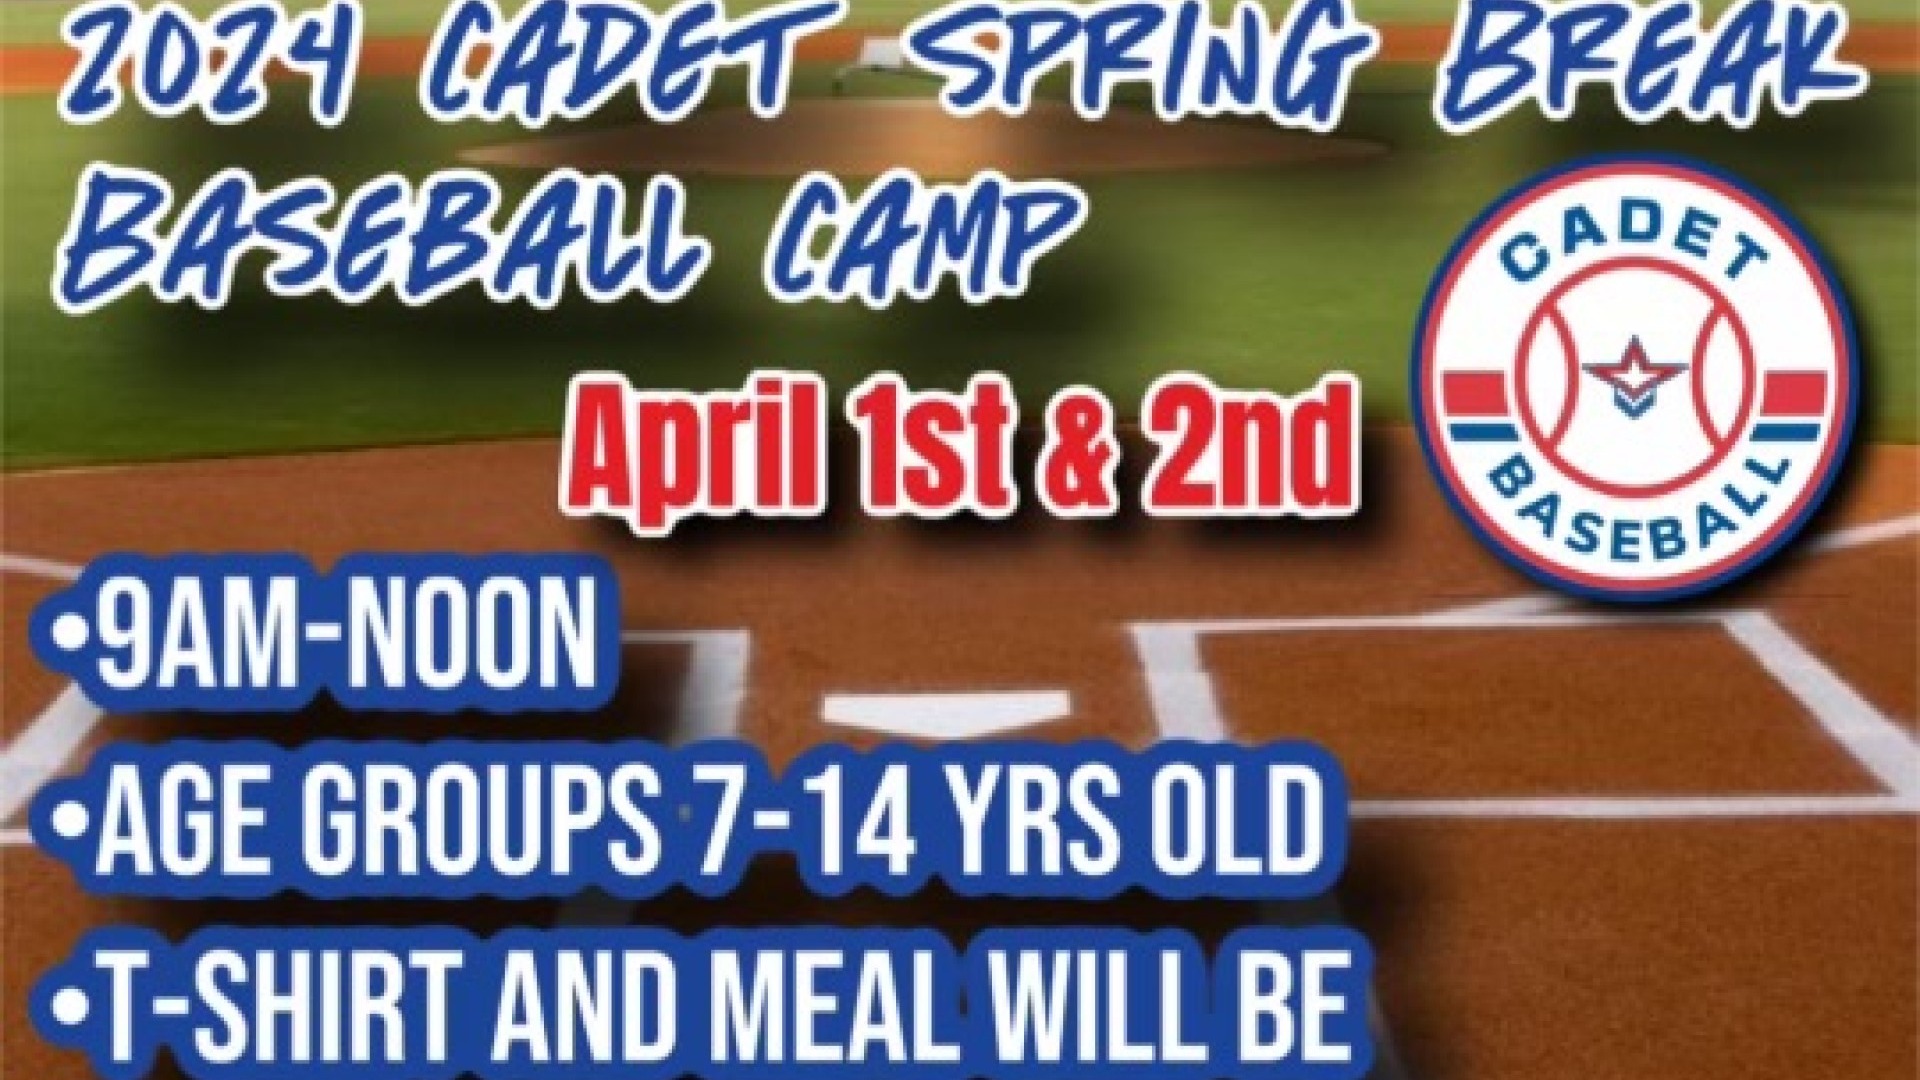 Slide 2 - FREE SPRING BASEBALL CAMP 4/1 & 4/2 Registration will be 8:30AM-9:00AM @ Entrance of Field. 